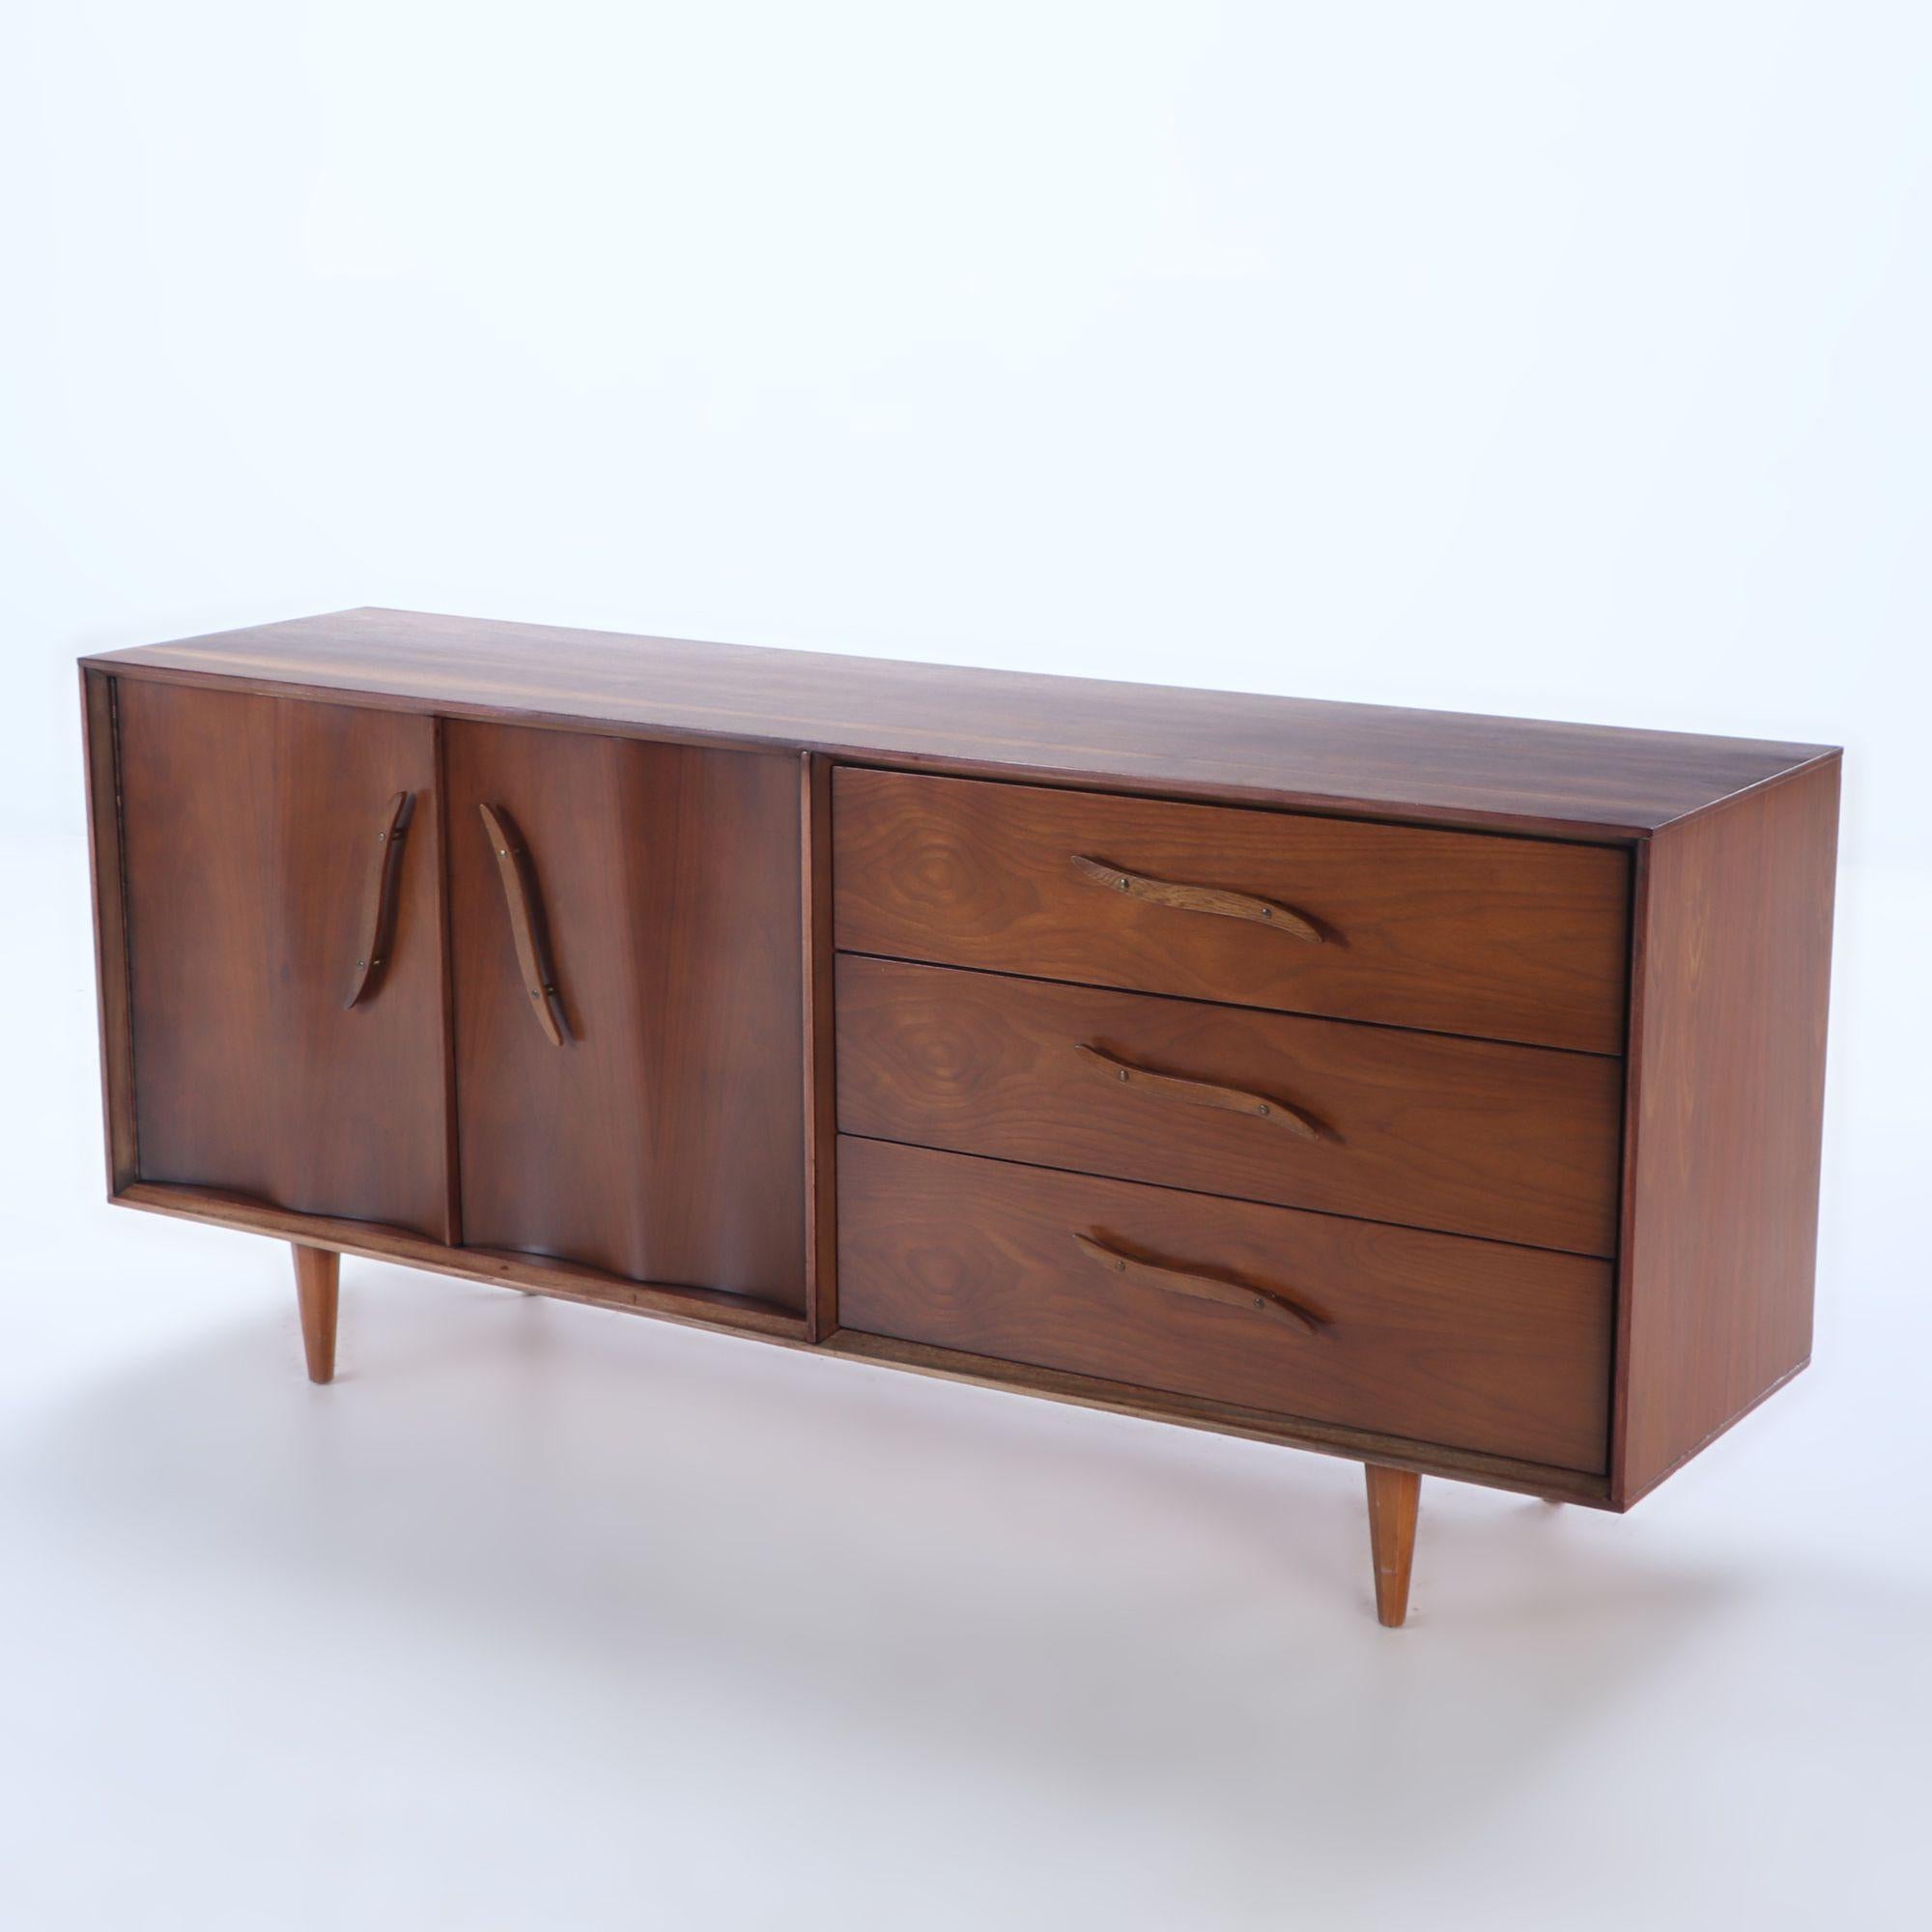 A Mid-Century Modern low boy dresser In Good Condition For Sale In Philadelphia, PA